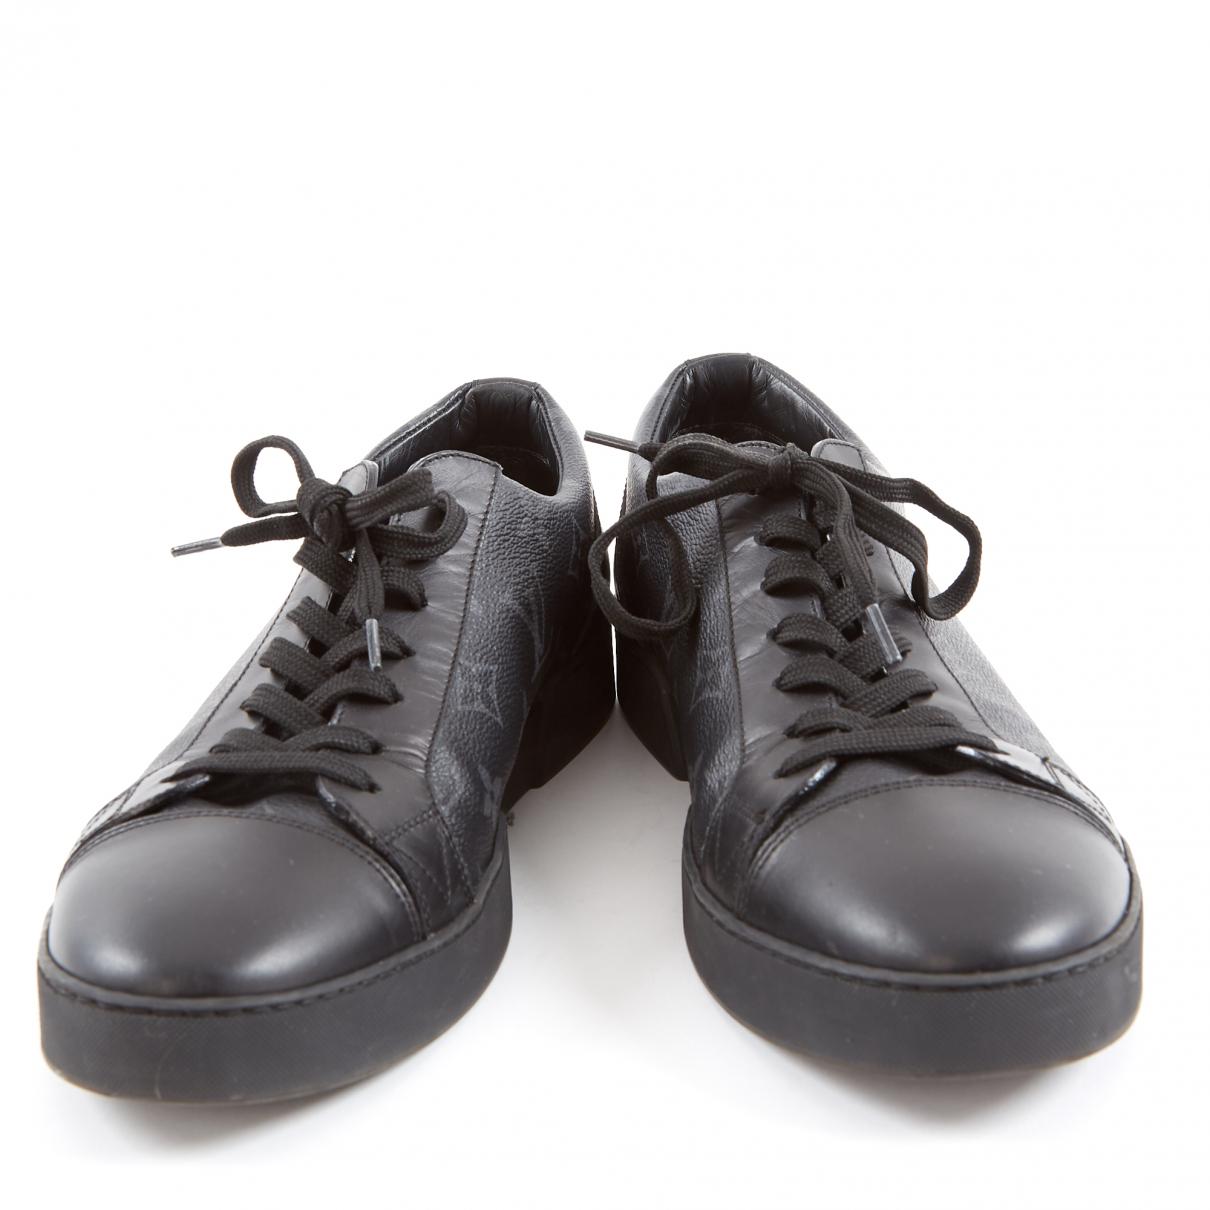 Louis Vuitton Canvas Low Trainers in Black for Men - Lyst